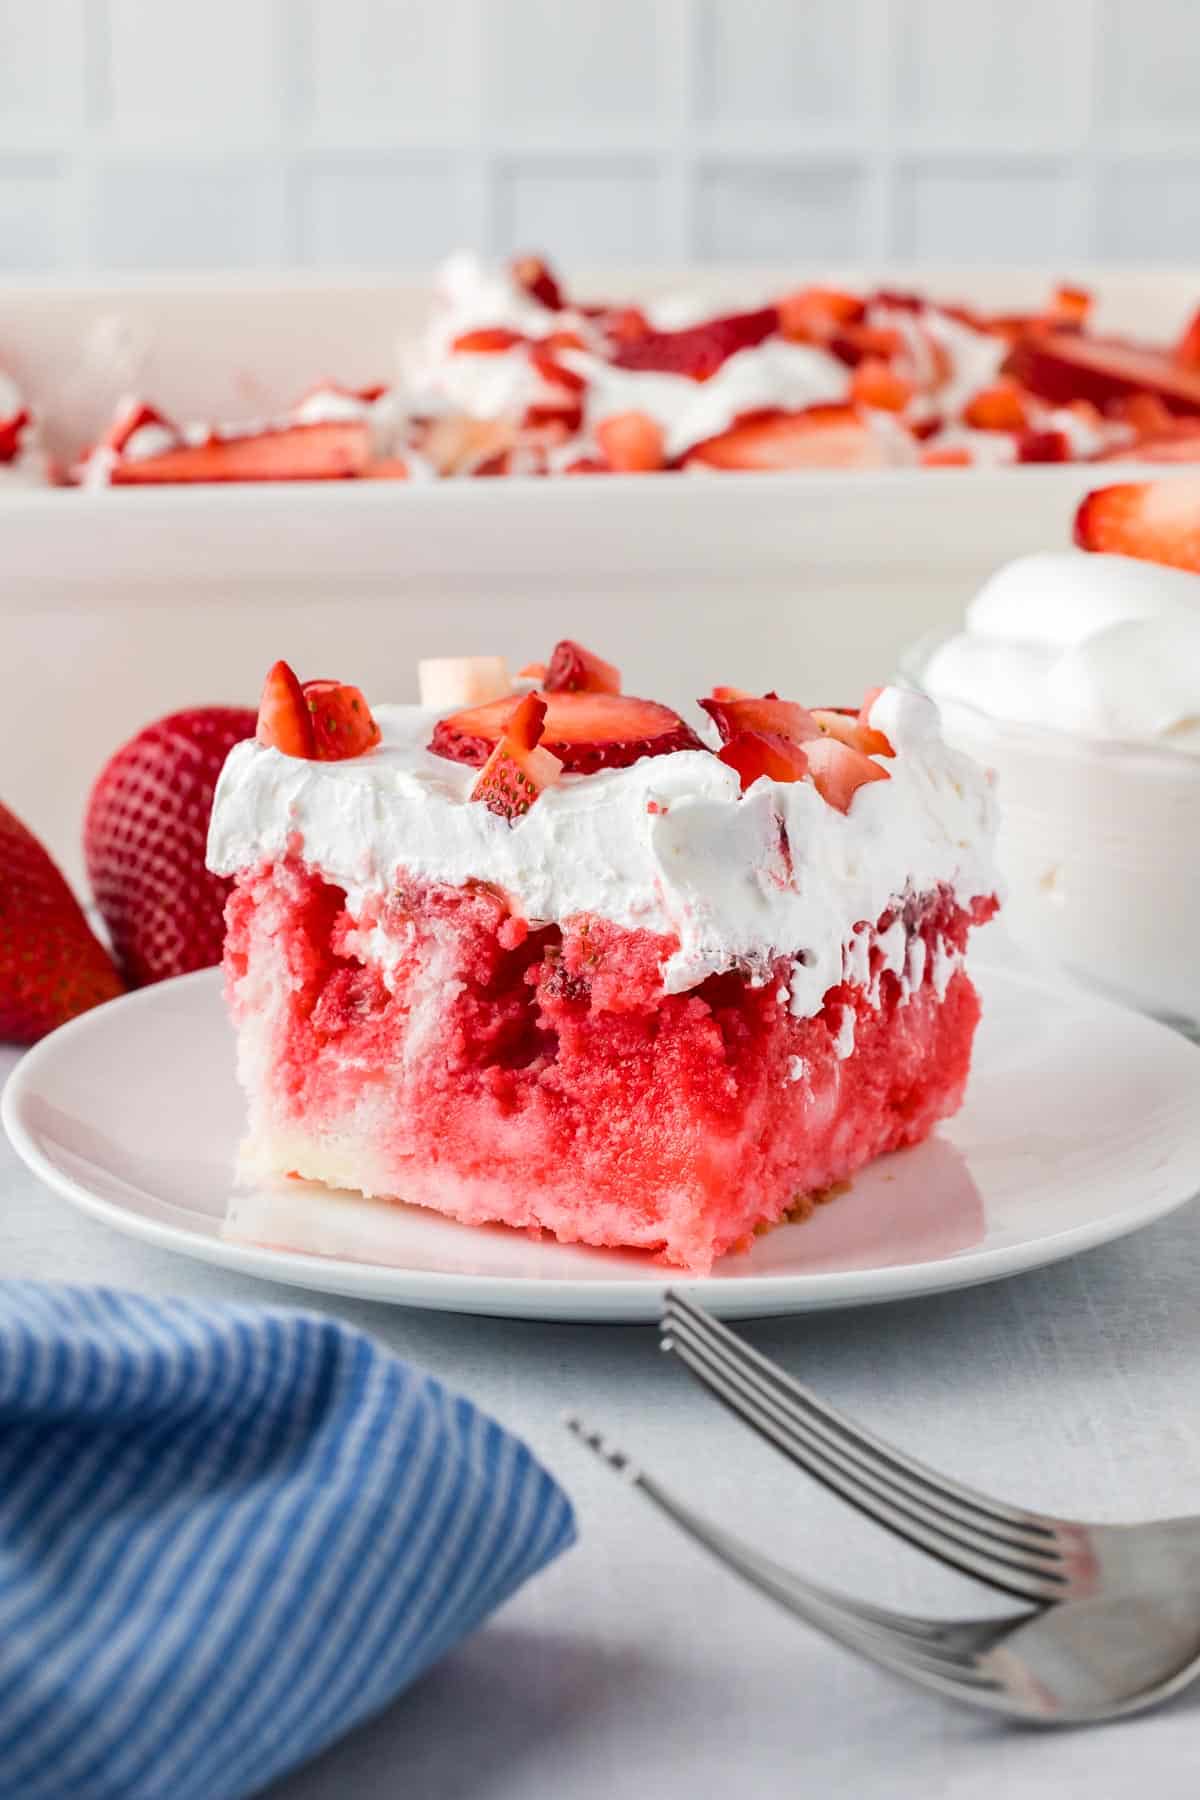 A slice of strawberry JELLO poke cake topped with whipped cream and diced strawberries on a white plate with more cake in a pan in the background on a kitchen table.